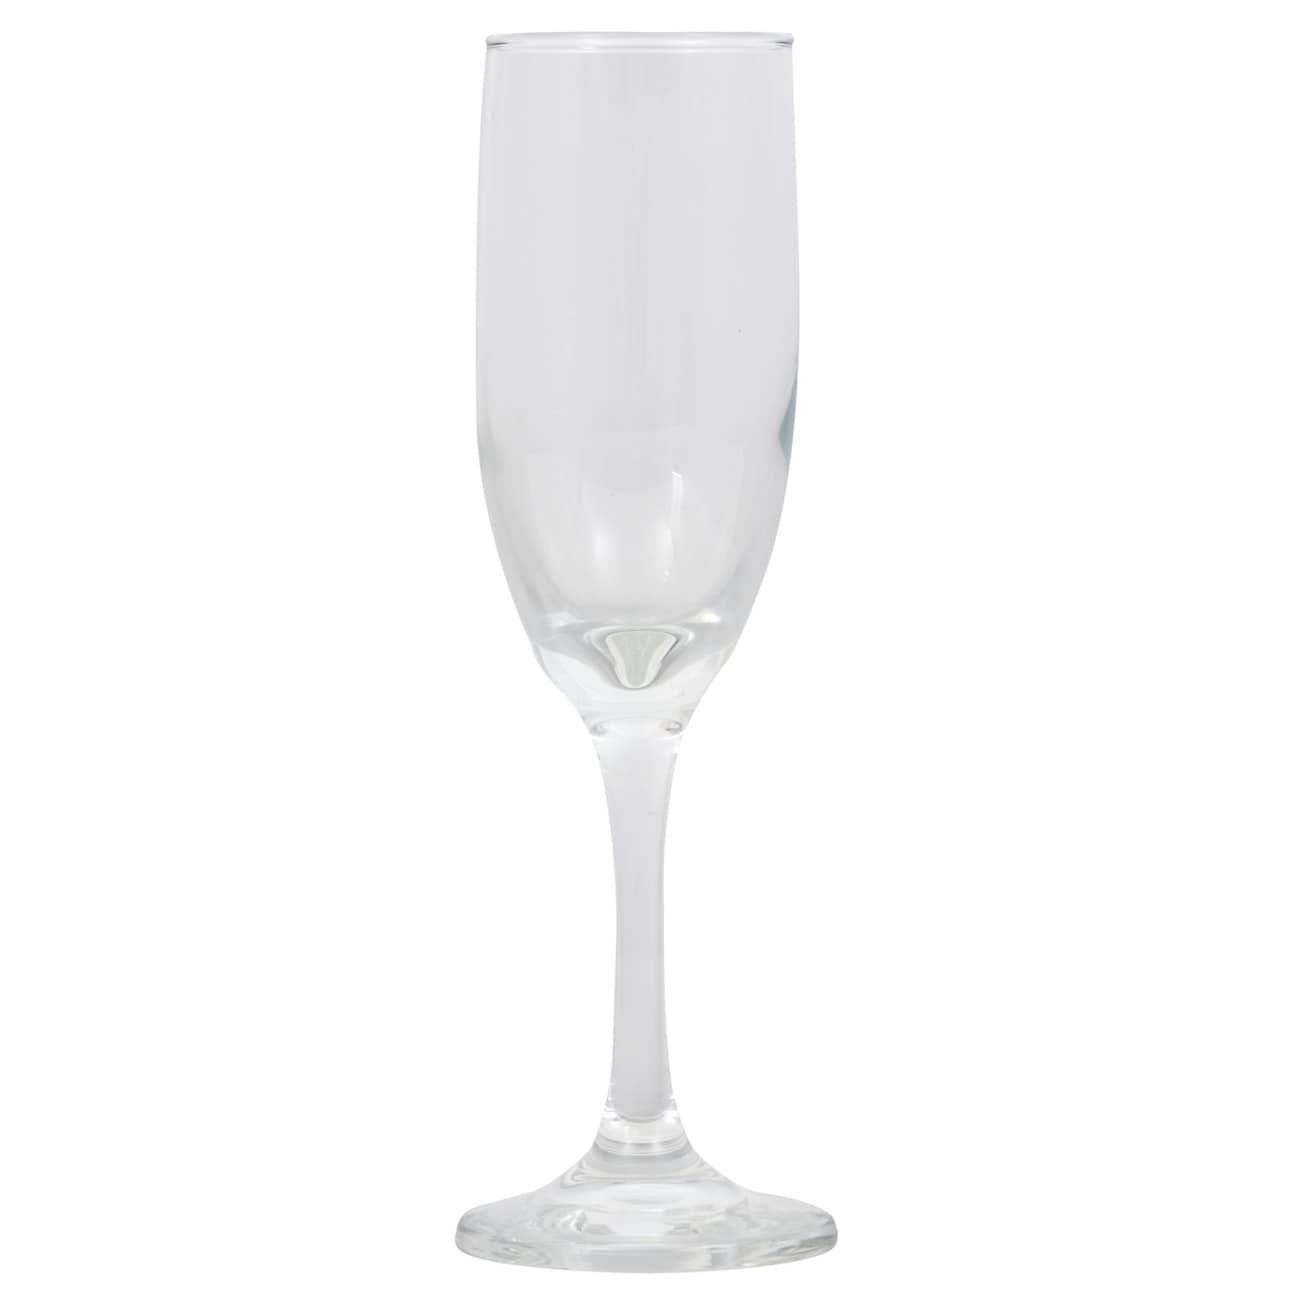 Cristar Tapered Champagne Flutes - 6.25oz